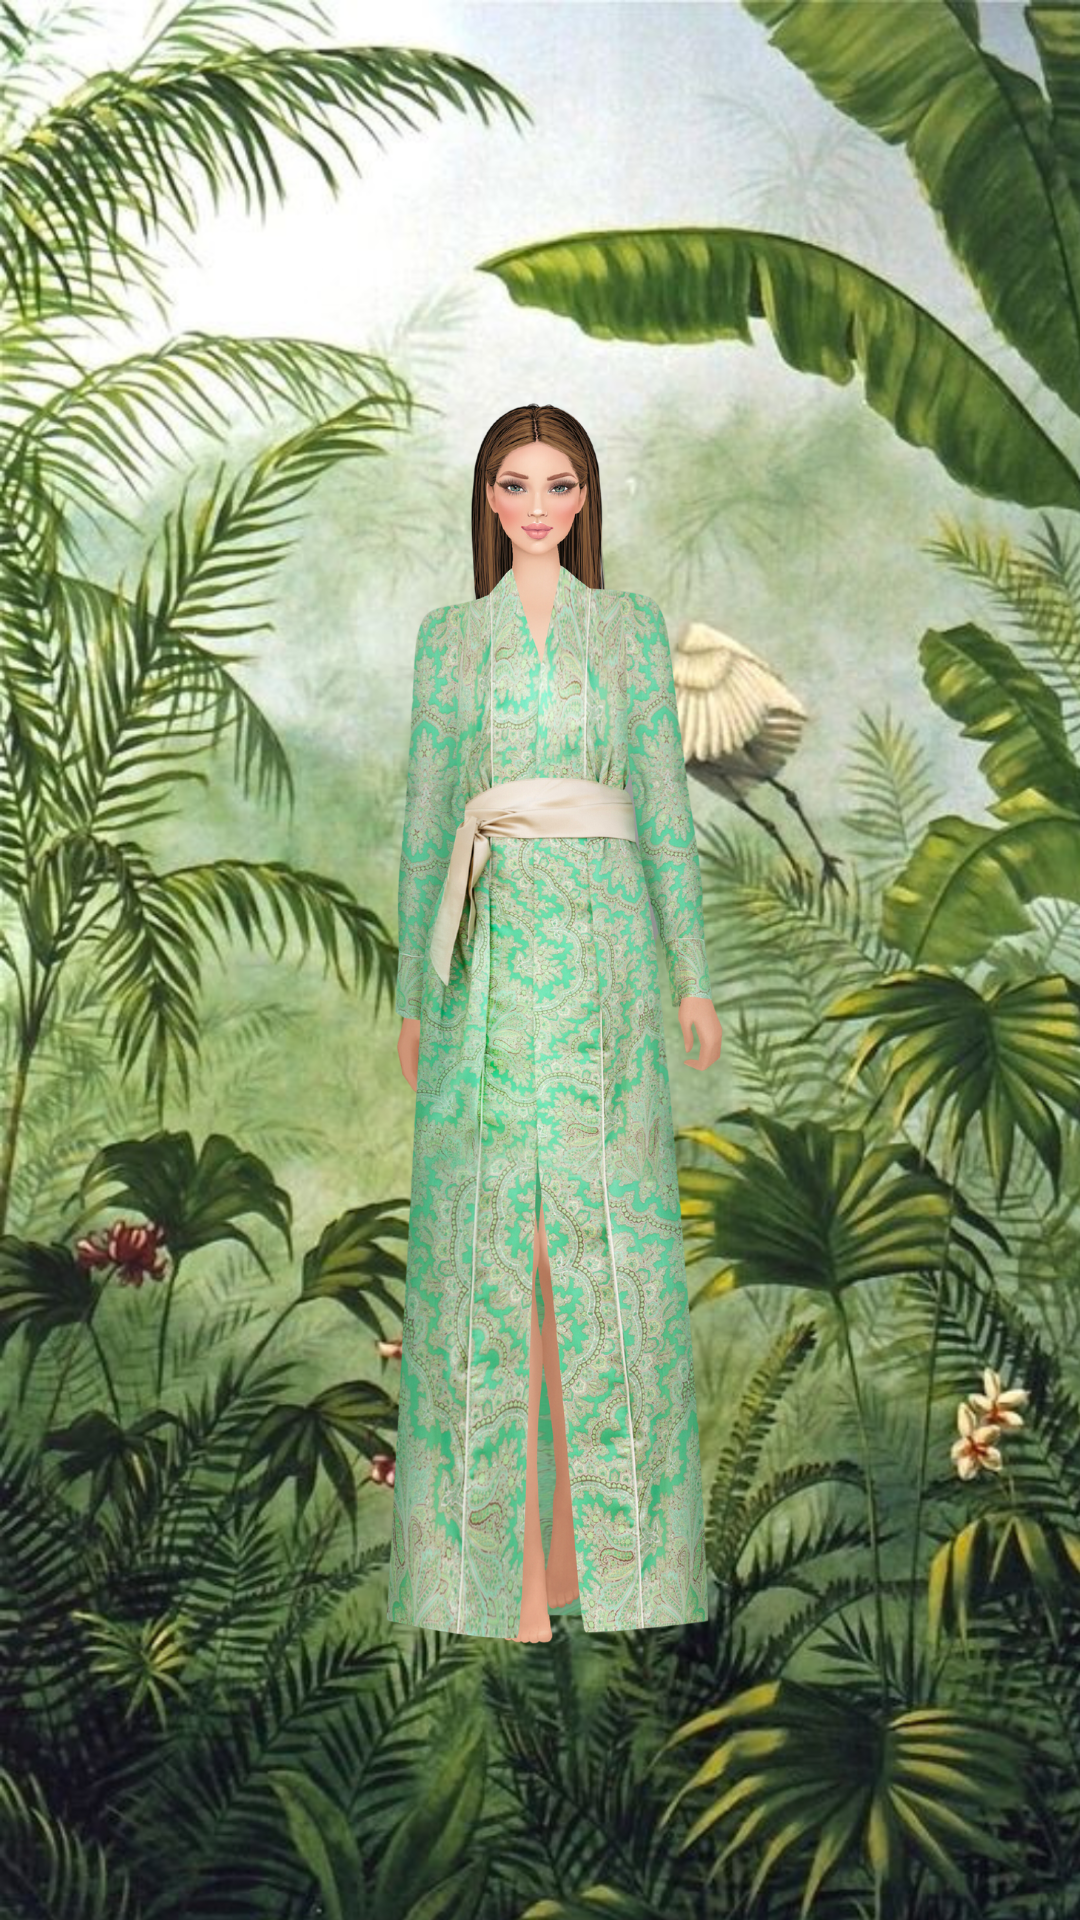 Diana d'Orville x Covet Fashion styling app render